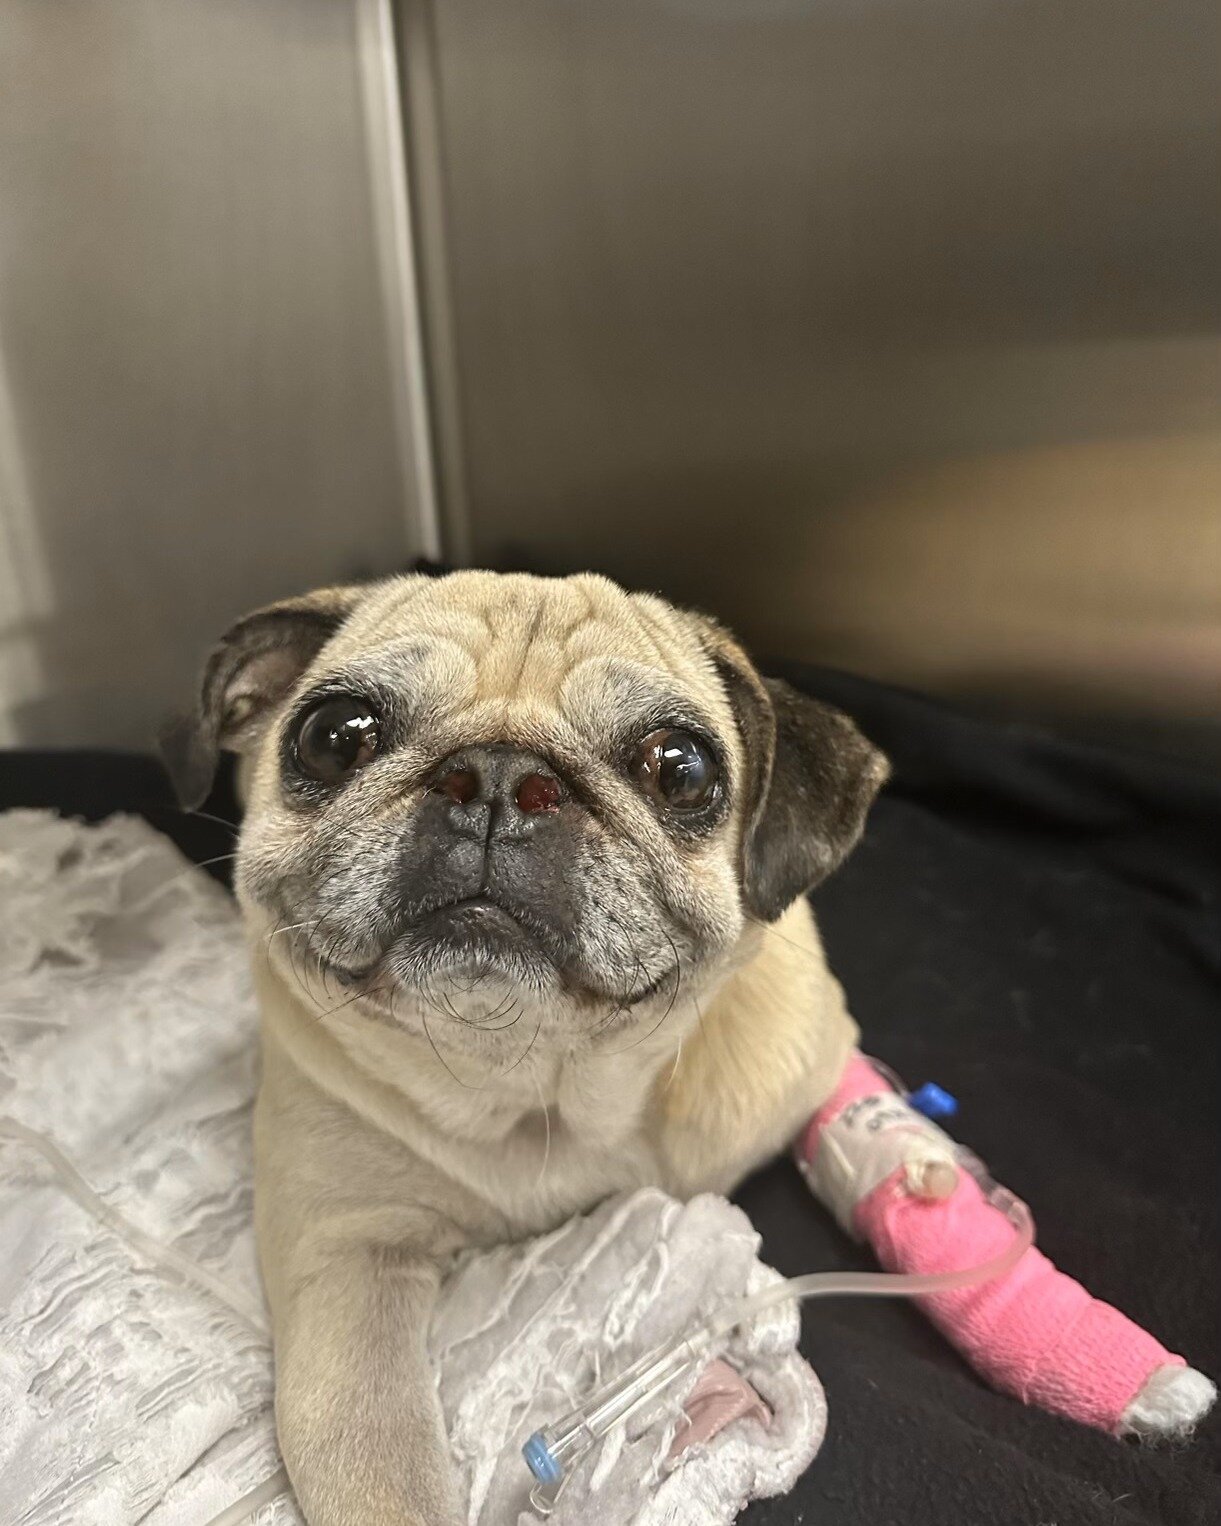 Yesterday, our foster girl, Sage, underwent surgery to repair...well, multiple issues!

She had stage 2 (out of 3 stages) laryngeal paralysis (loss of function in the nerve controlling the larynx), elongated soft palate, laryngeal saccules, and small